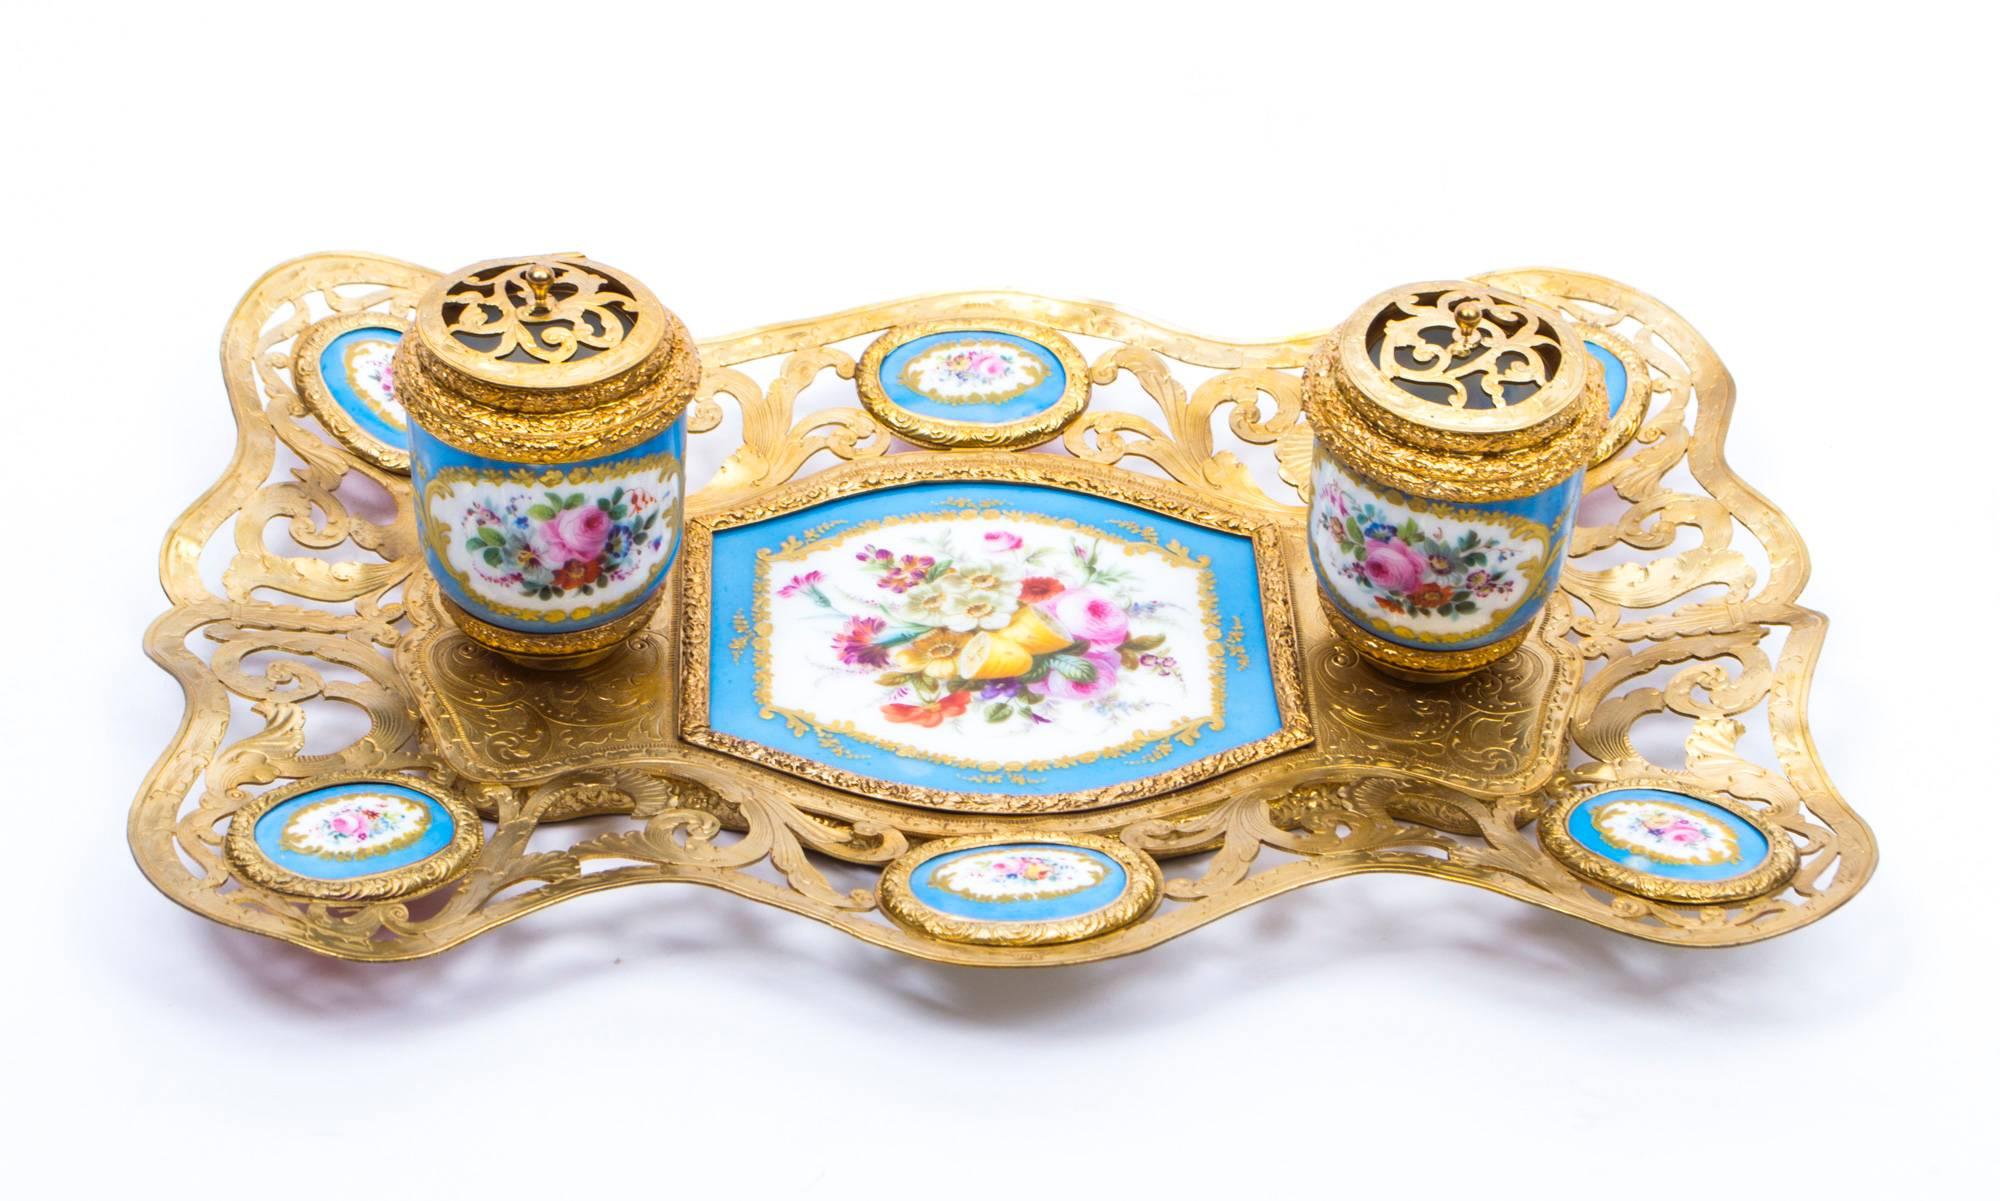 This is a wonderful antique French ormolu inkstand, mounted with Bleu Celeste Sèvres Porcelain panels that have been beautifully gilded and painted with floral bouquets, circa 1870 in date.

Of rectangular form with a pair of raised porcelain